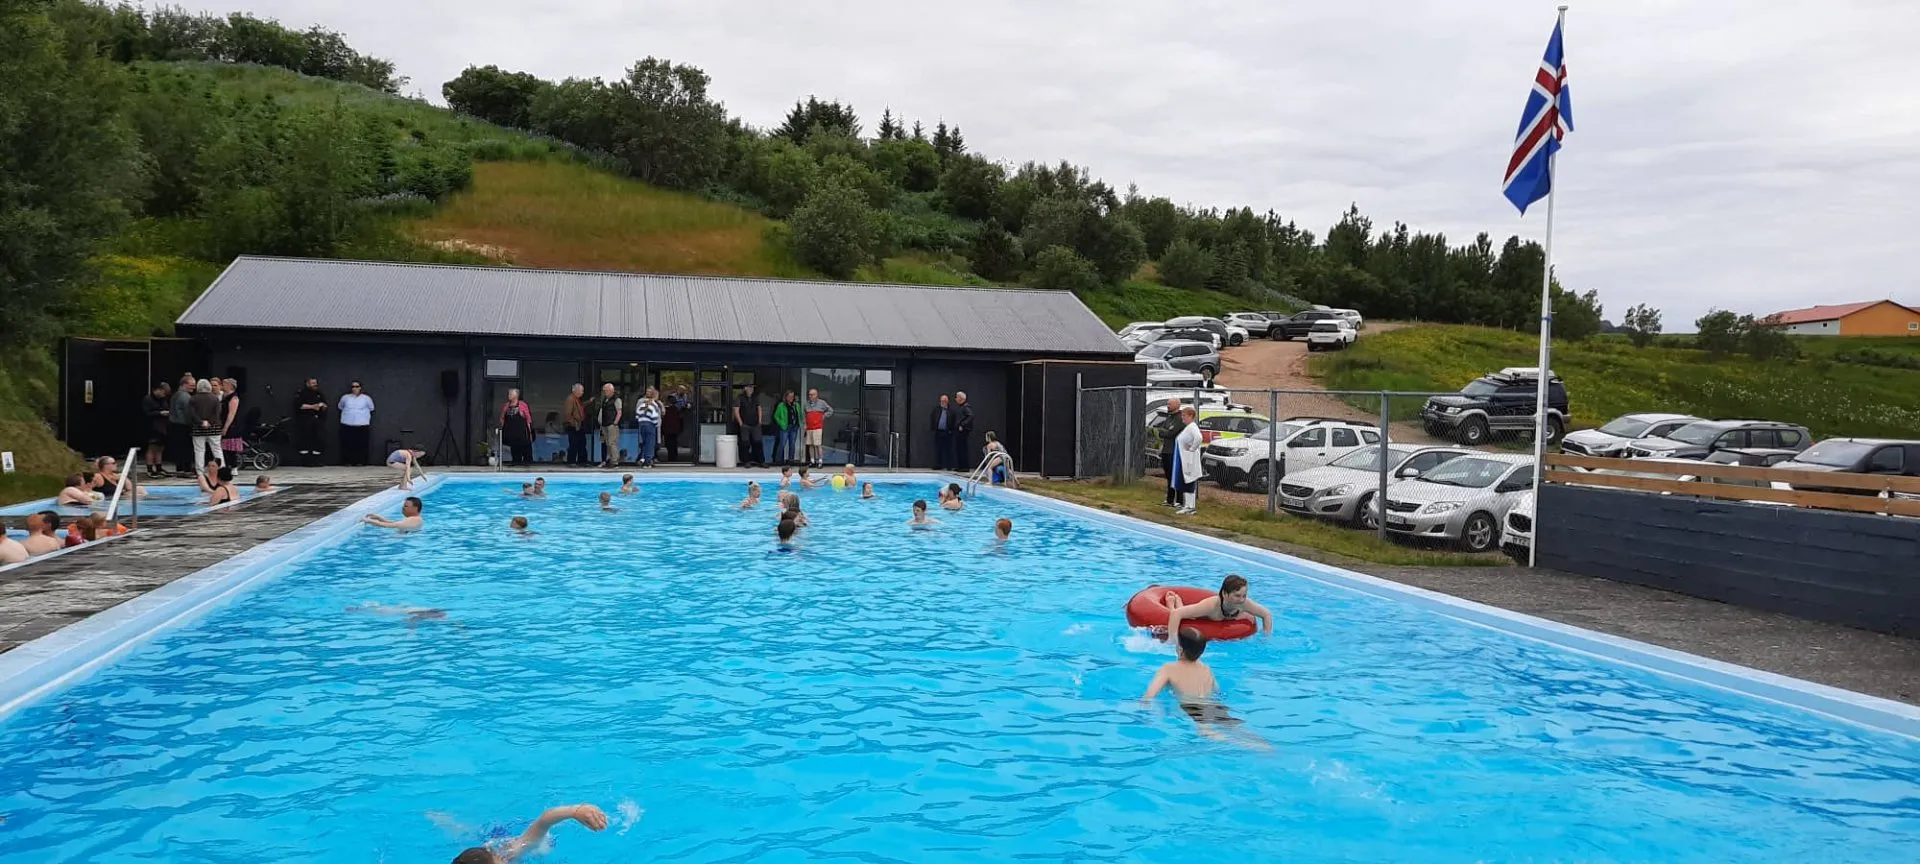 Hreppslaug in Iceland, Europe | Hot Springs & Pools,Swimming - Rated 0.7